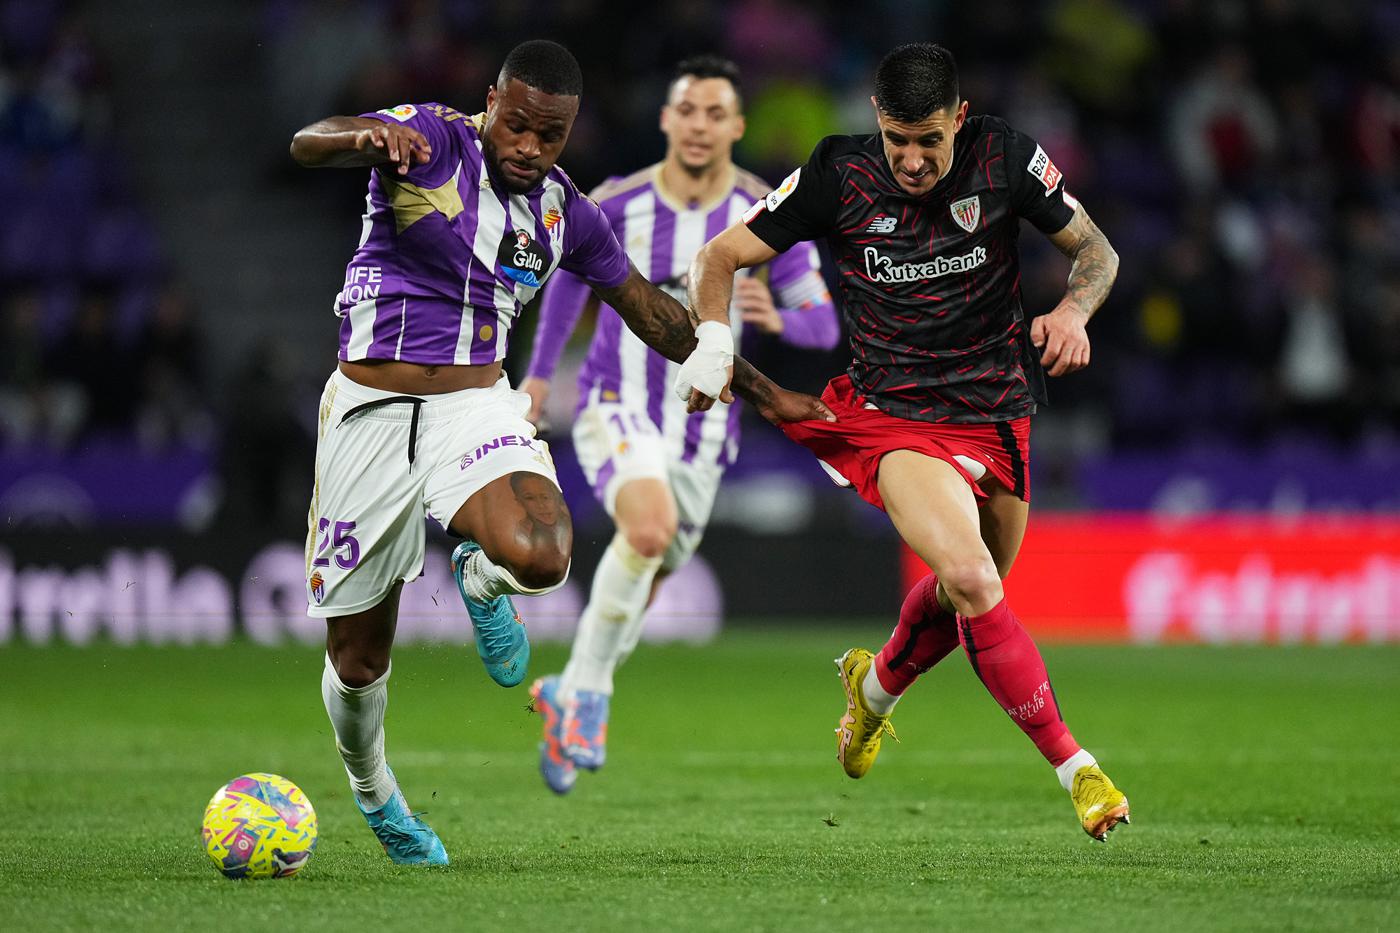 Valladolid - Athletic - 1:3. Spain Championship, 26th round. Match review, statistics.